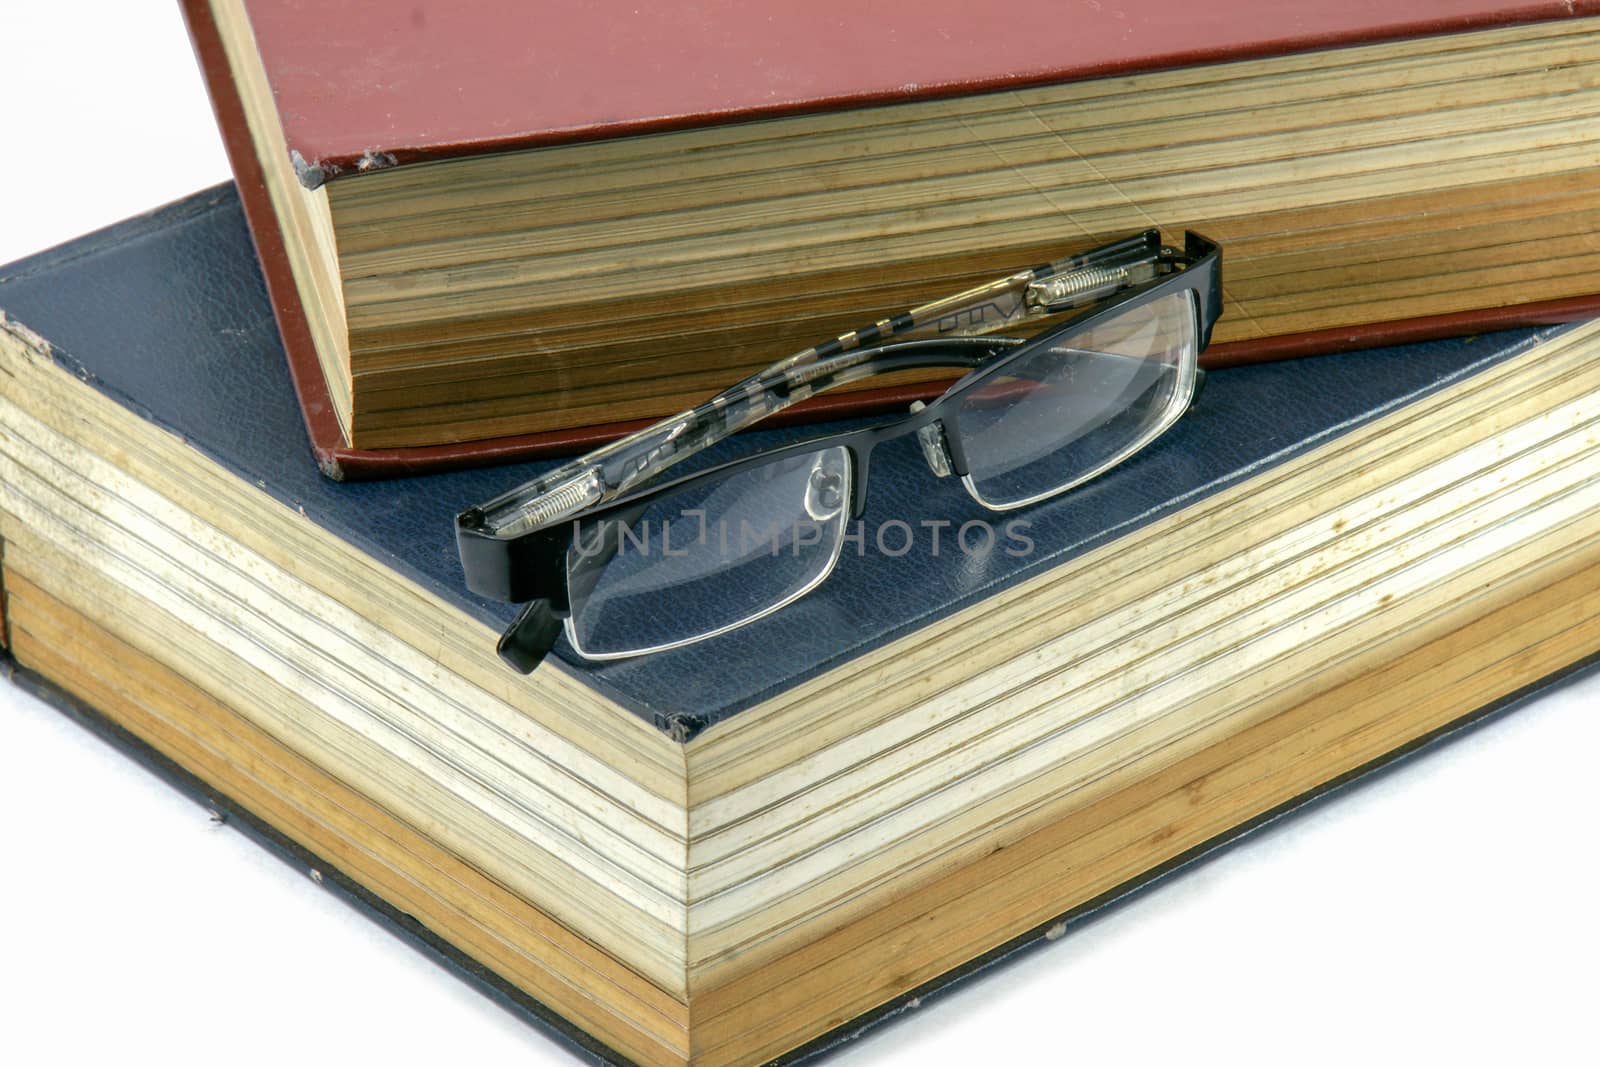 Old text books or bible with eyeglasses on them